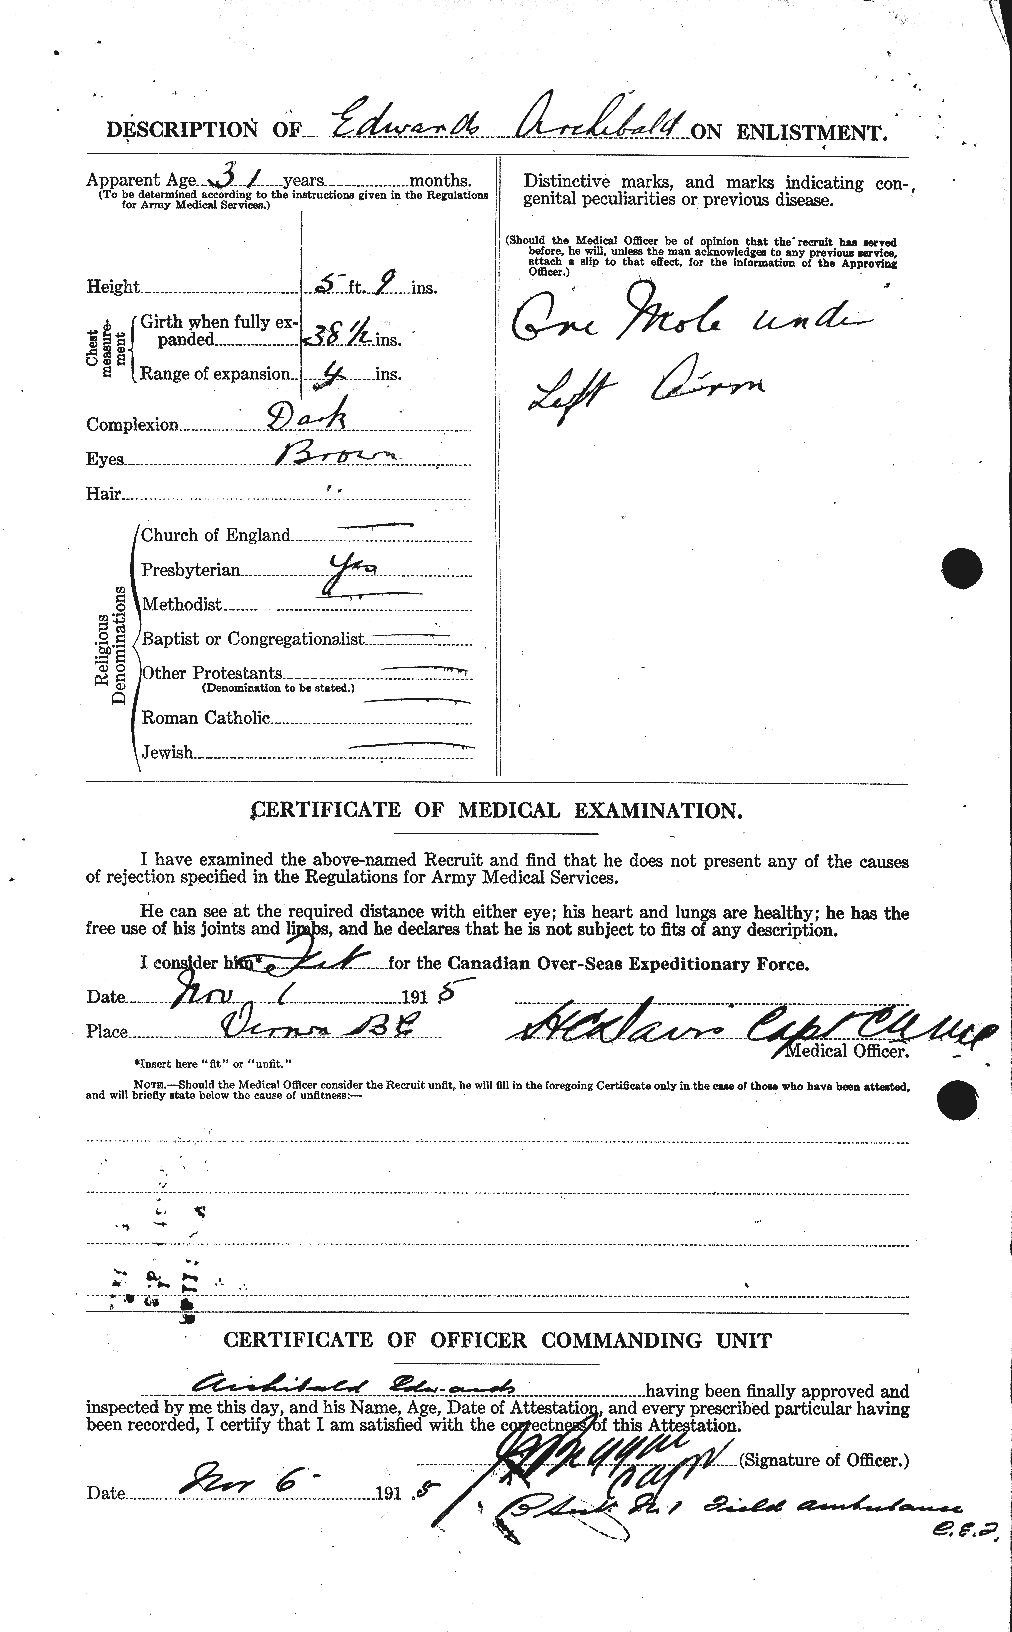 Personnel Records of the First World War - CEF 313119b